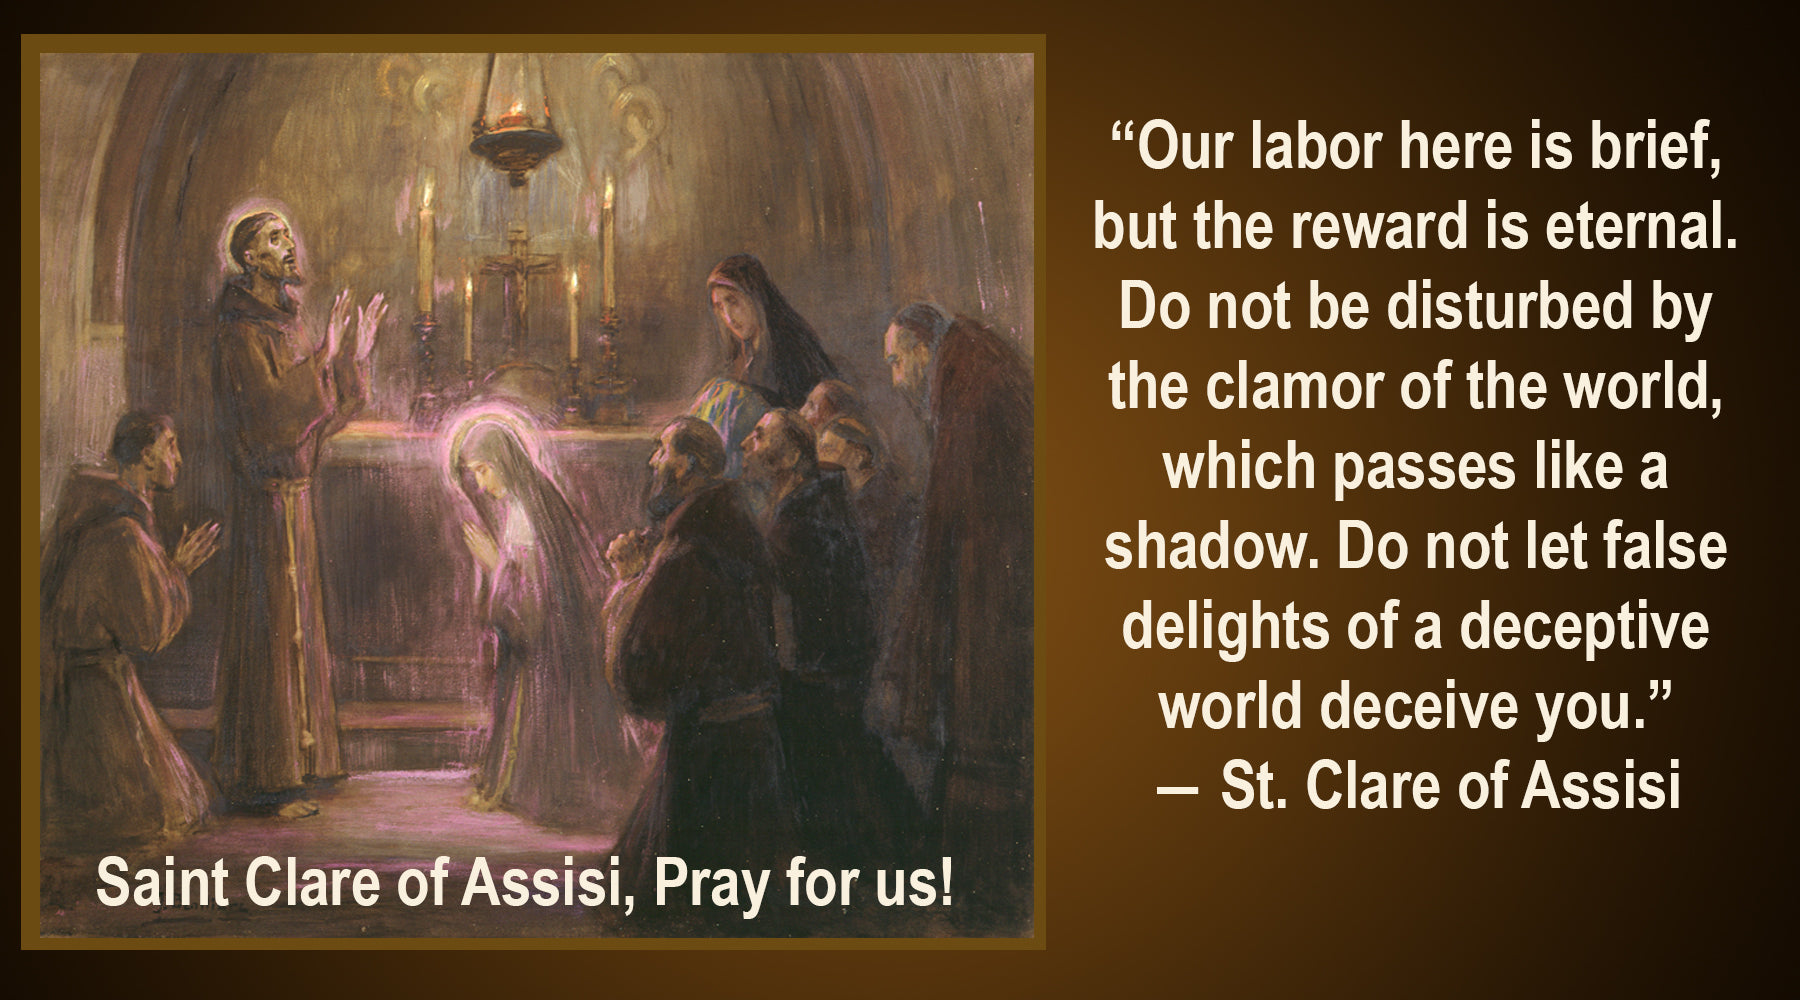 Today is The Feast of St. Clare of Assisi's Day, August 11